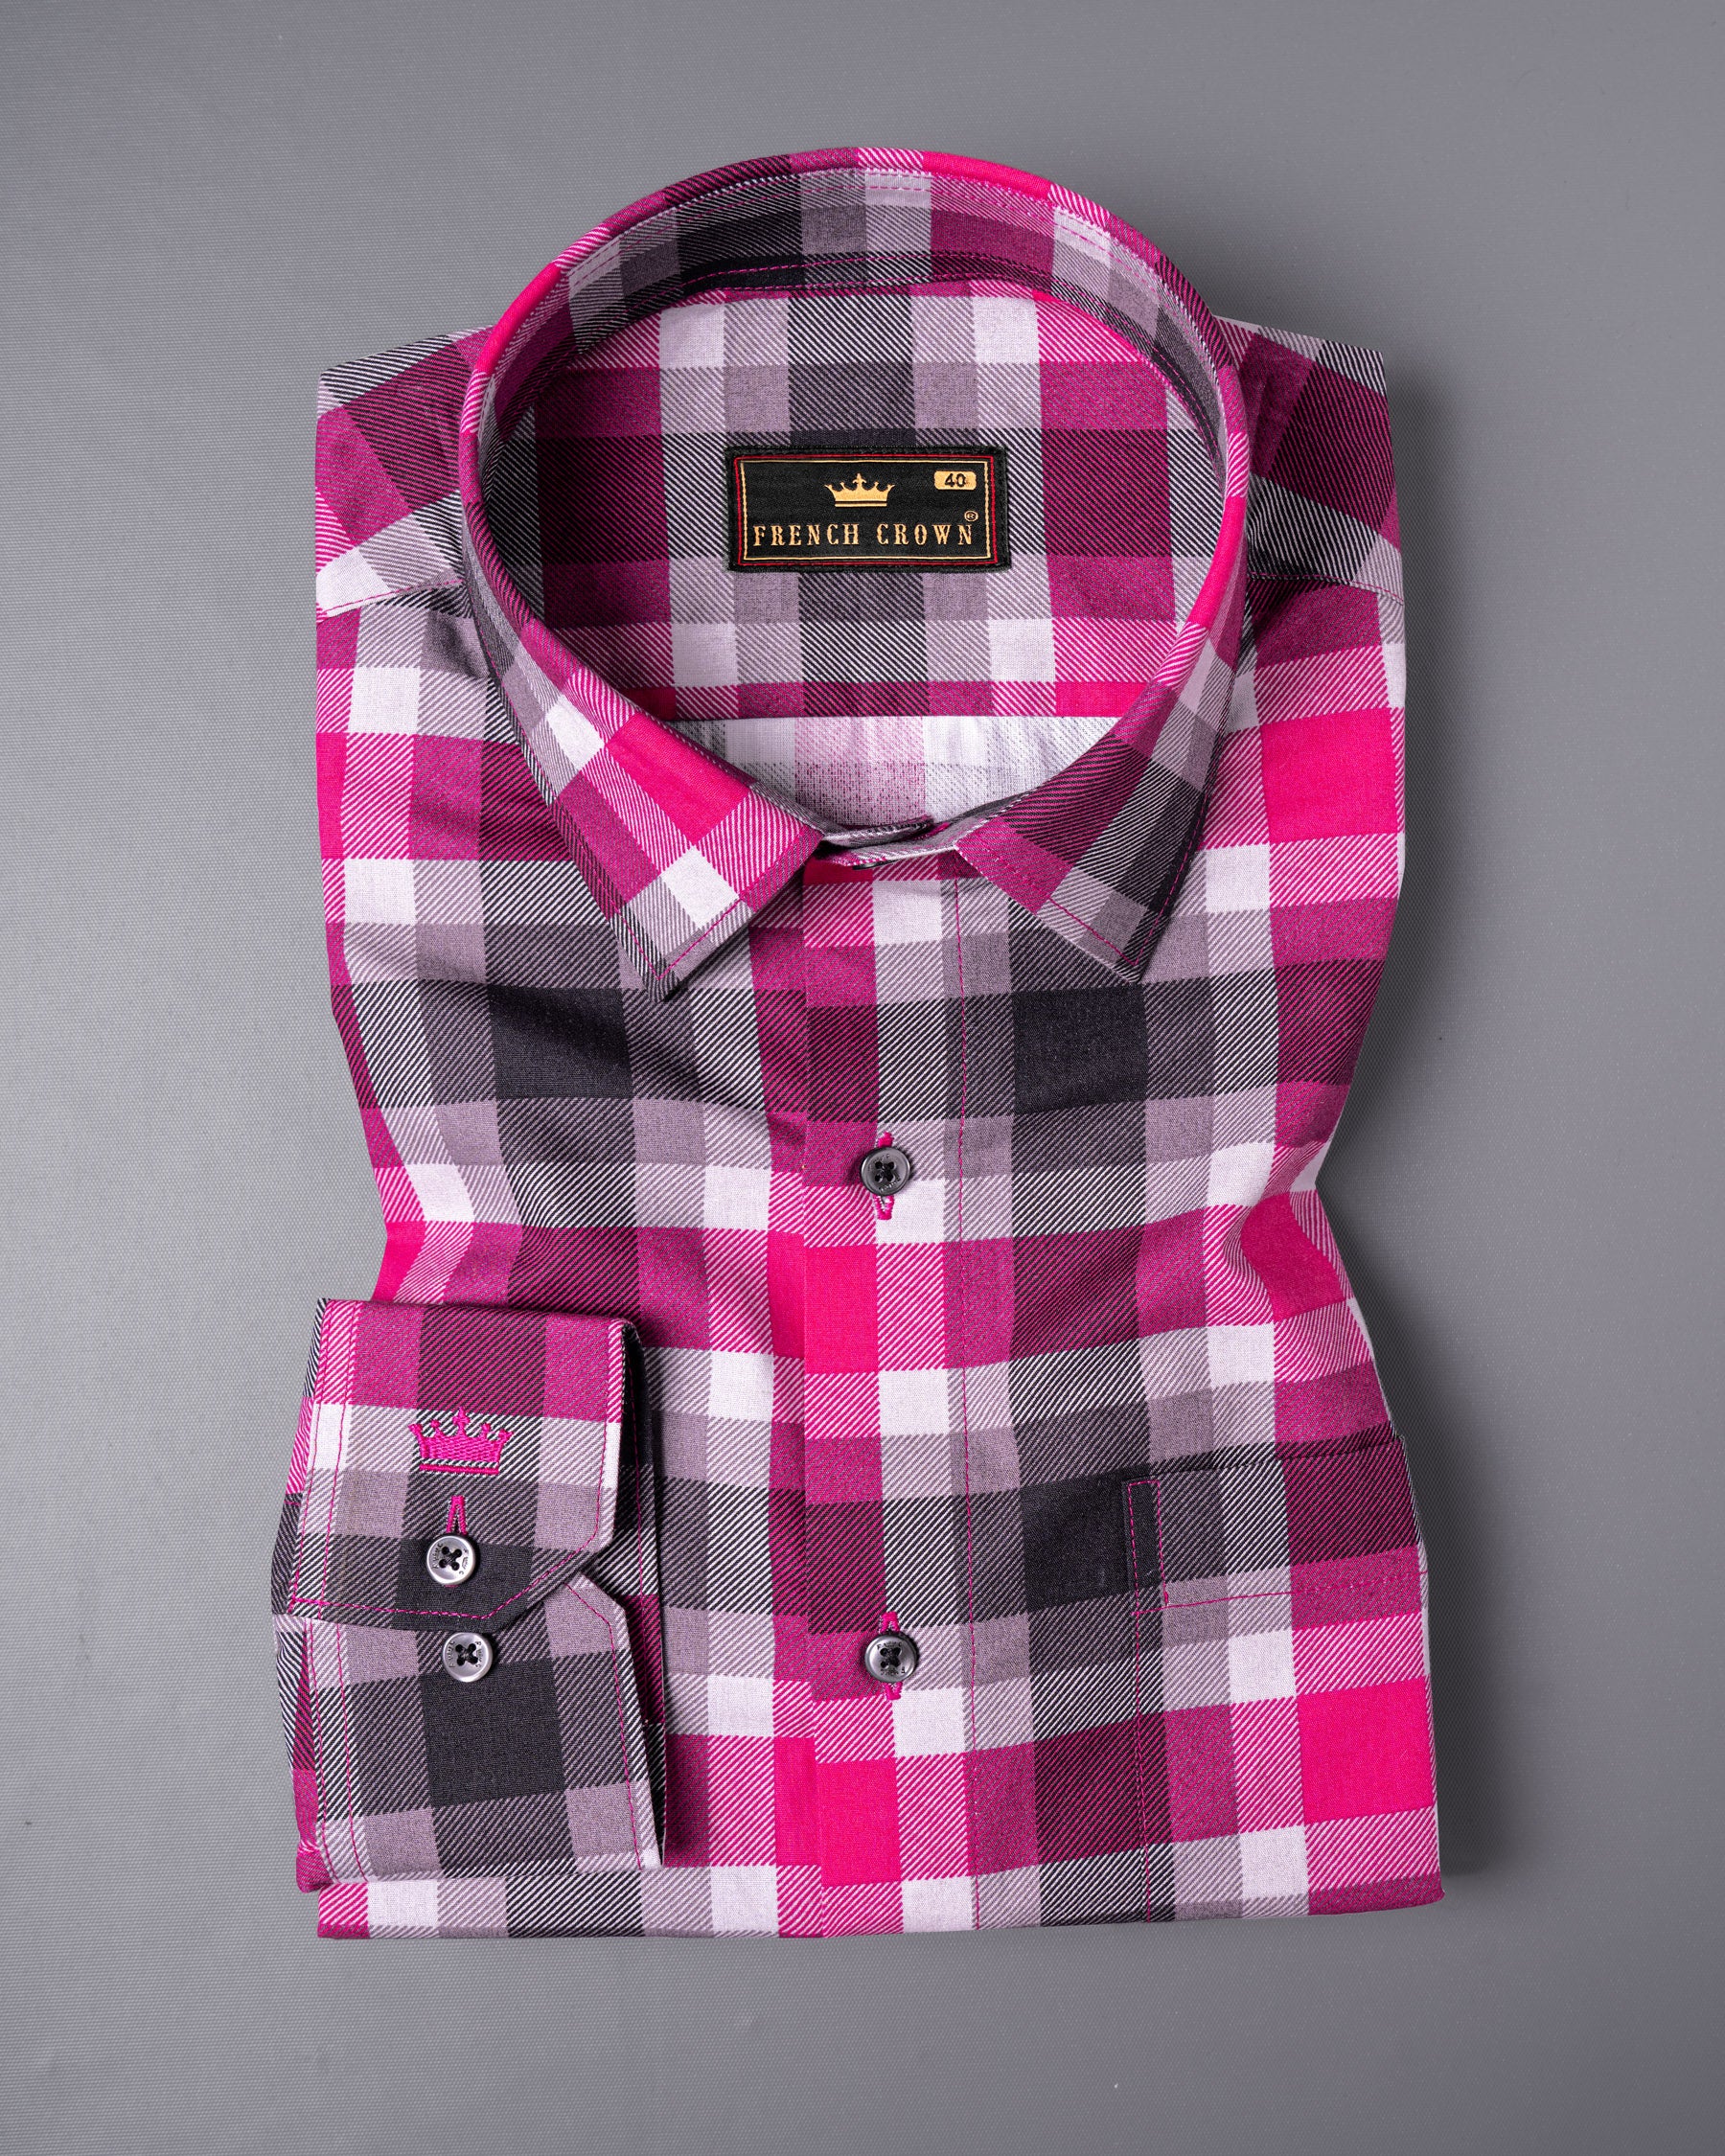 Ruby Pink with Jade Black and White Plaid Royal Oxford Shirt 5090-BLK-38, 5090-BLK-H-38, 5090-BLK-39, 5090-BLK-H-39, 5090-BLK-40, 5090-BLK-H-40, 5090-BLK-42, 5090-BLK-H-42, 5090-BLK-44, 5090-BLK-H-44, 5090-BLK-46, 5090-BLK-H-46, 5090-BLK-48, 5090-BLK-H-48, 5090-BLK-50, 5090-BLK-H-50, 5090-BLK-52, 5090-BLK-H-52